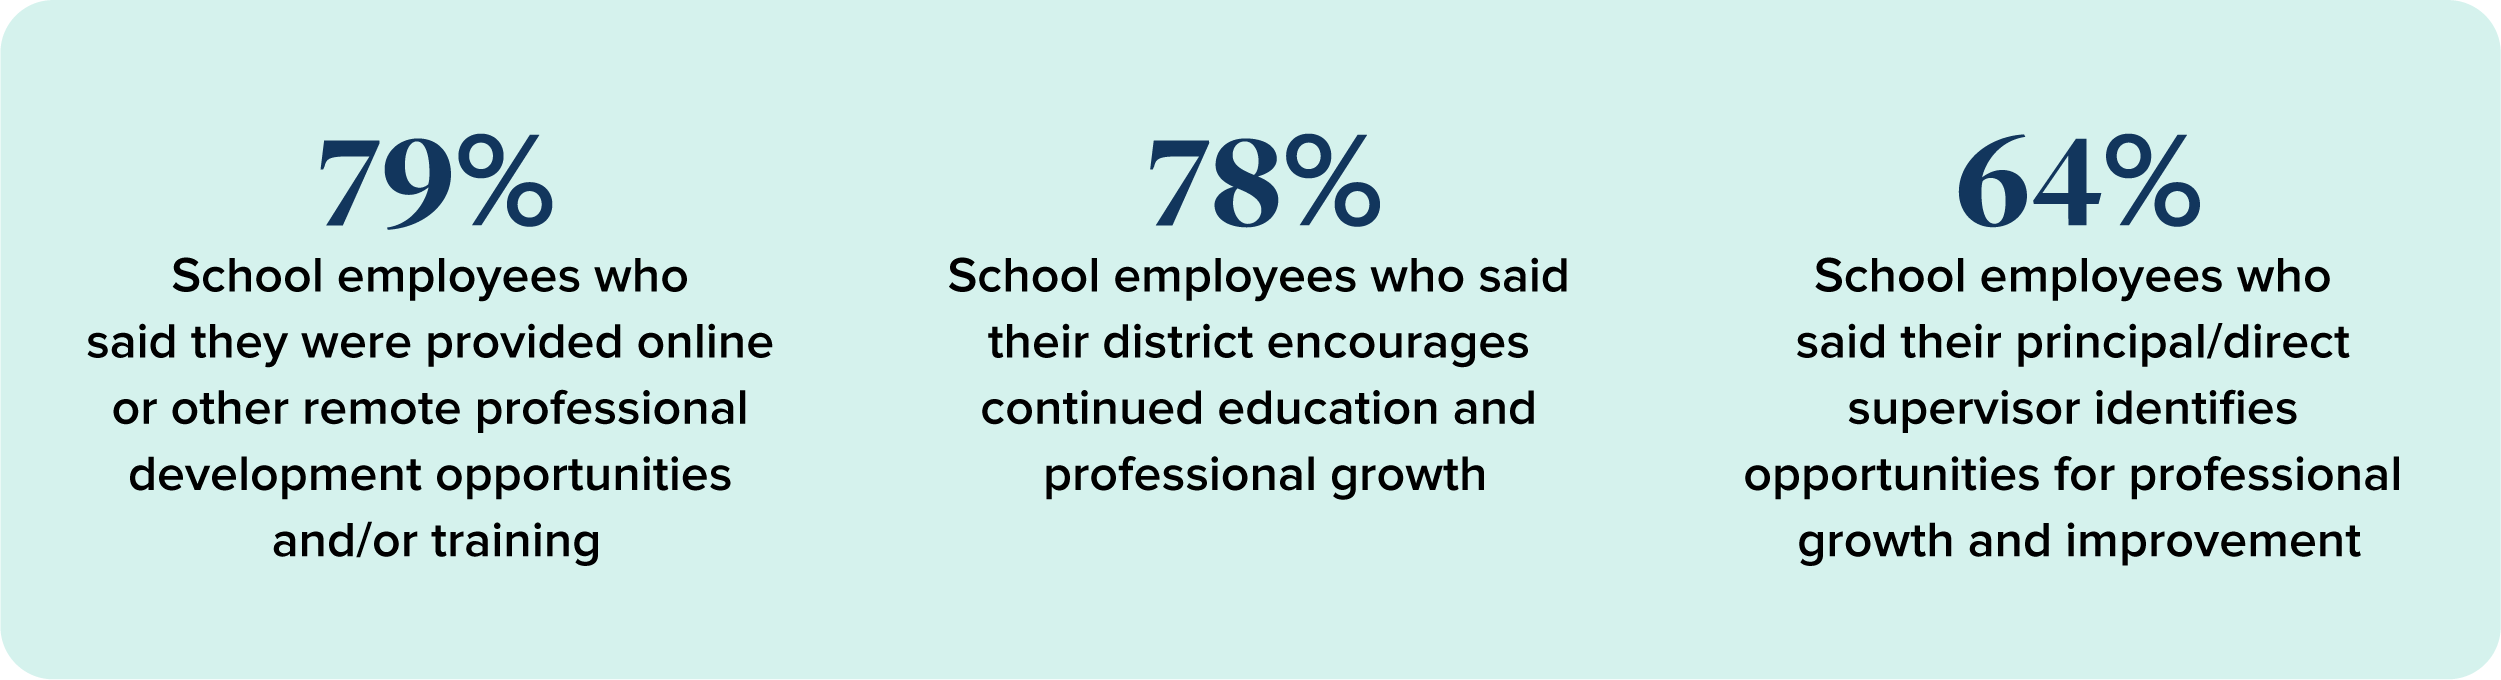 79% school employees who said they were provided online or other remote professional development opportunities and/or training, 78% school employees who said their district encourages continued education and professional growth, 64% school employees who said their principle/direct supervisor identifies opportunities for professional growth and improvement,